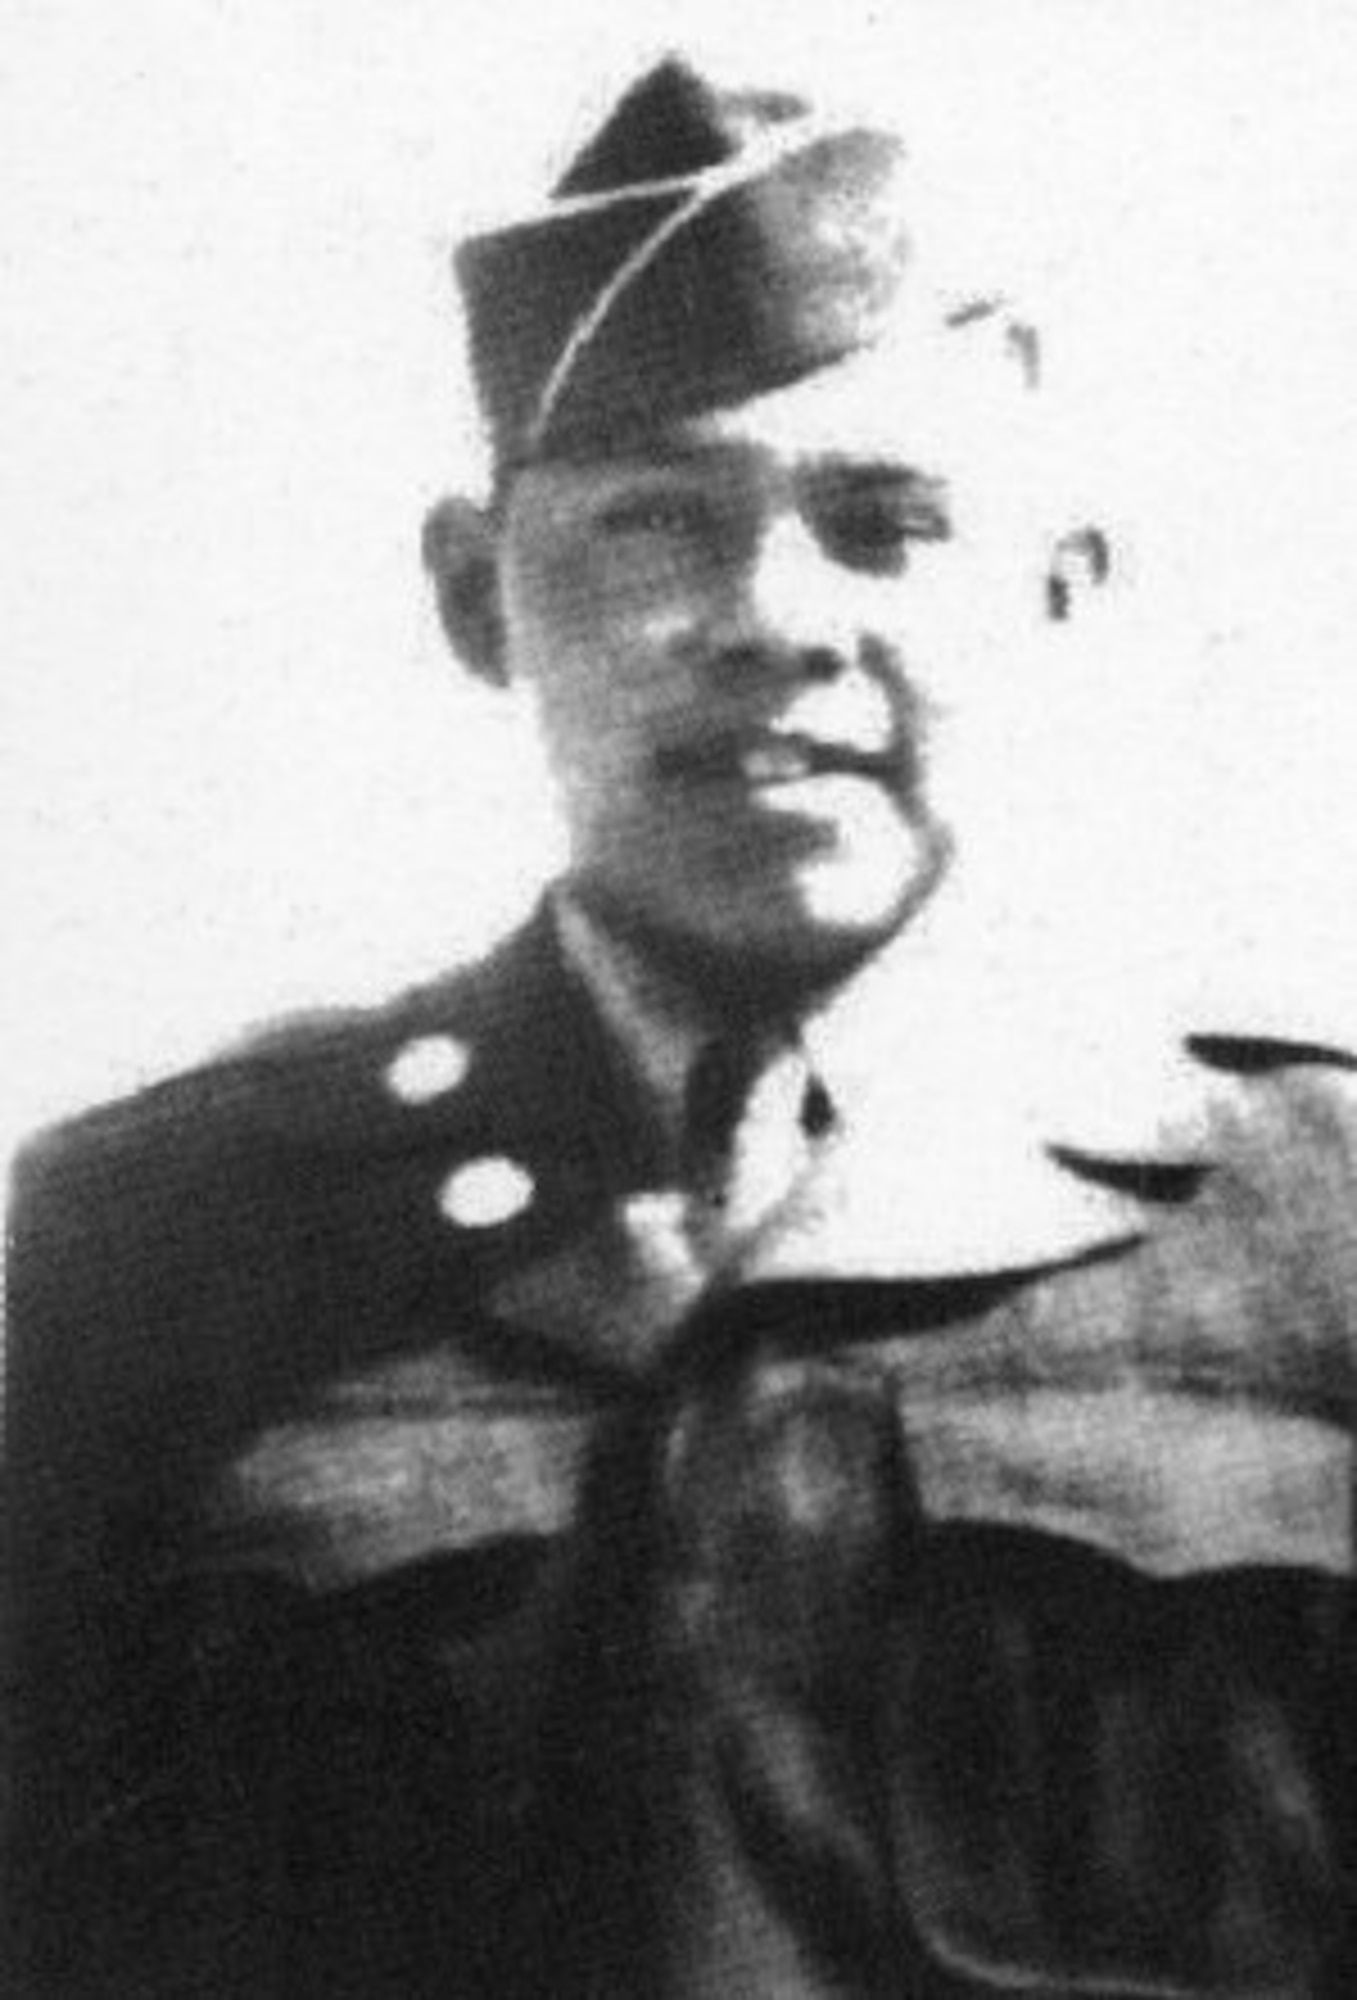 Pfc. Charles George is the most recent Native American to receive the Medal of Honor. He was recognized for saving members of his unit during the Korean War by throwing himself on a grenade and absorbing the explosion. The Charles George Veterans Affairs Medical Center in Asheville, N.C., is named in his honor. He was a member of the Cherokee tribe. (Courtesy photo)